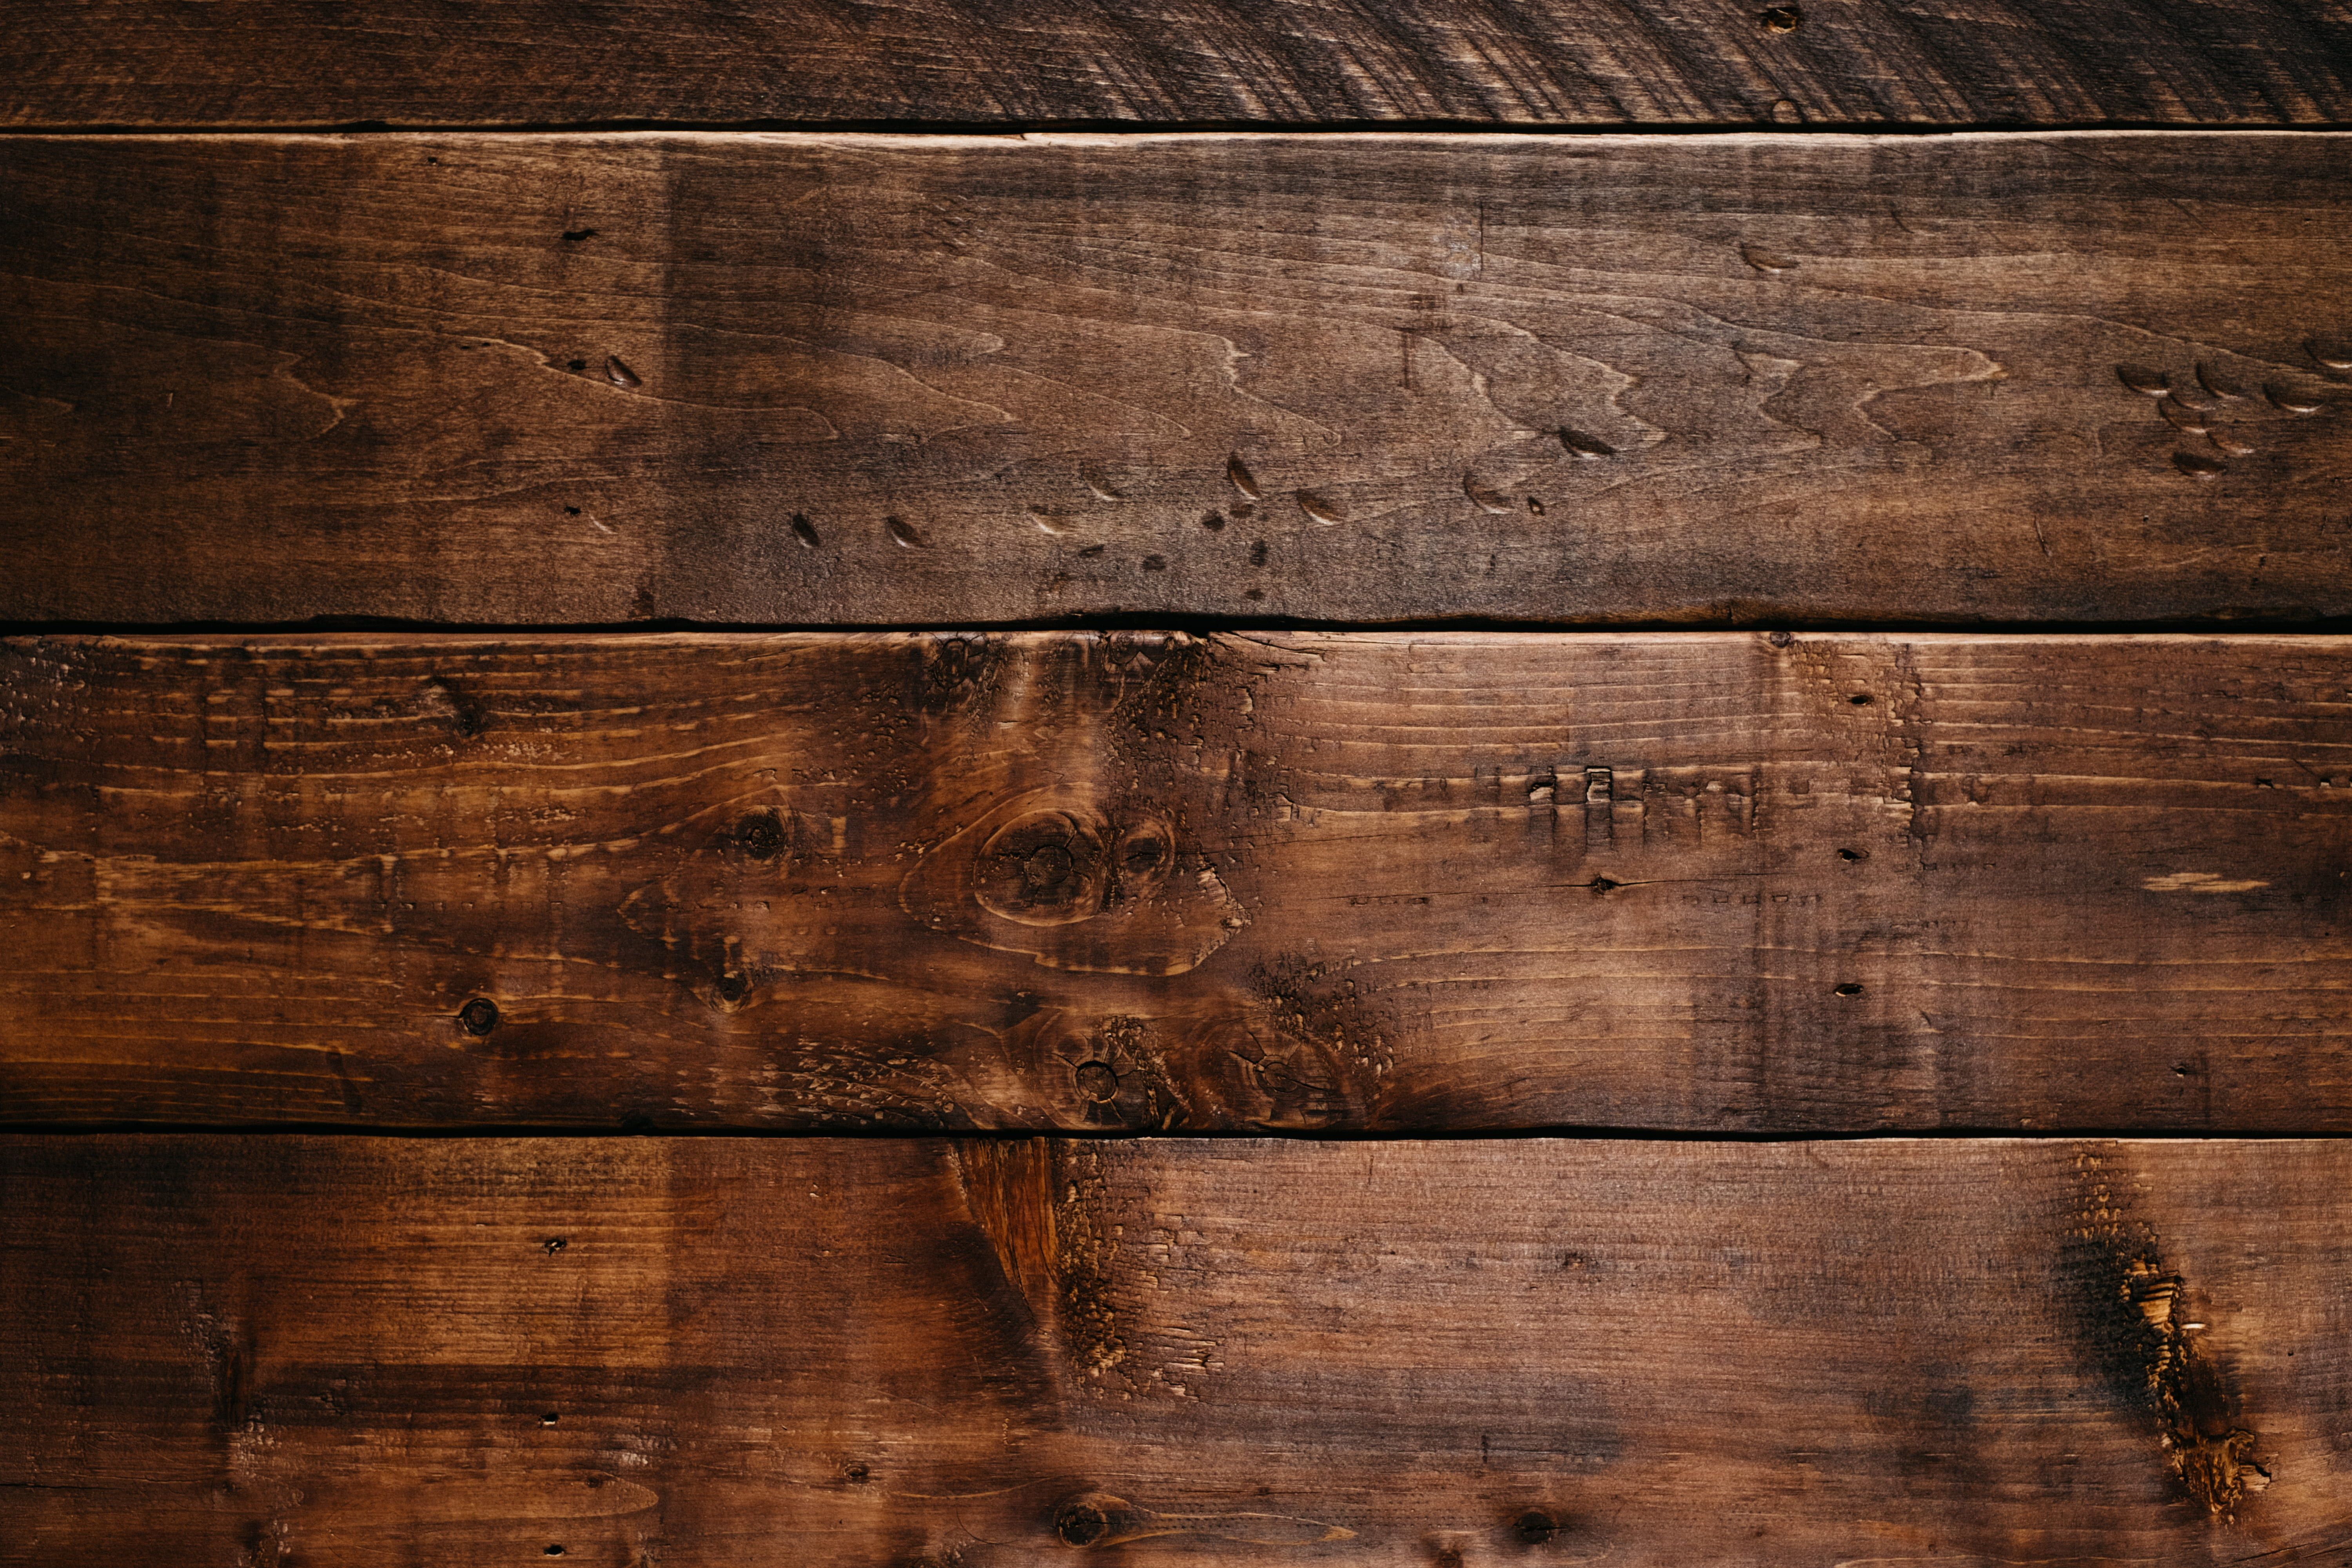 brown wooden planks, photo of brown wooden board #wood #planks #table #texture #background K #wallpaper #hdwallpaper. Wooden planks, Softwood floors, Flooring